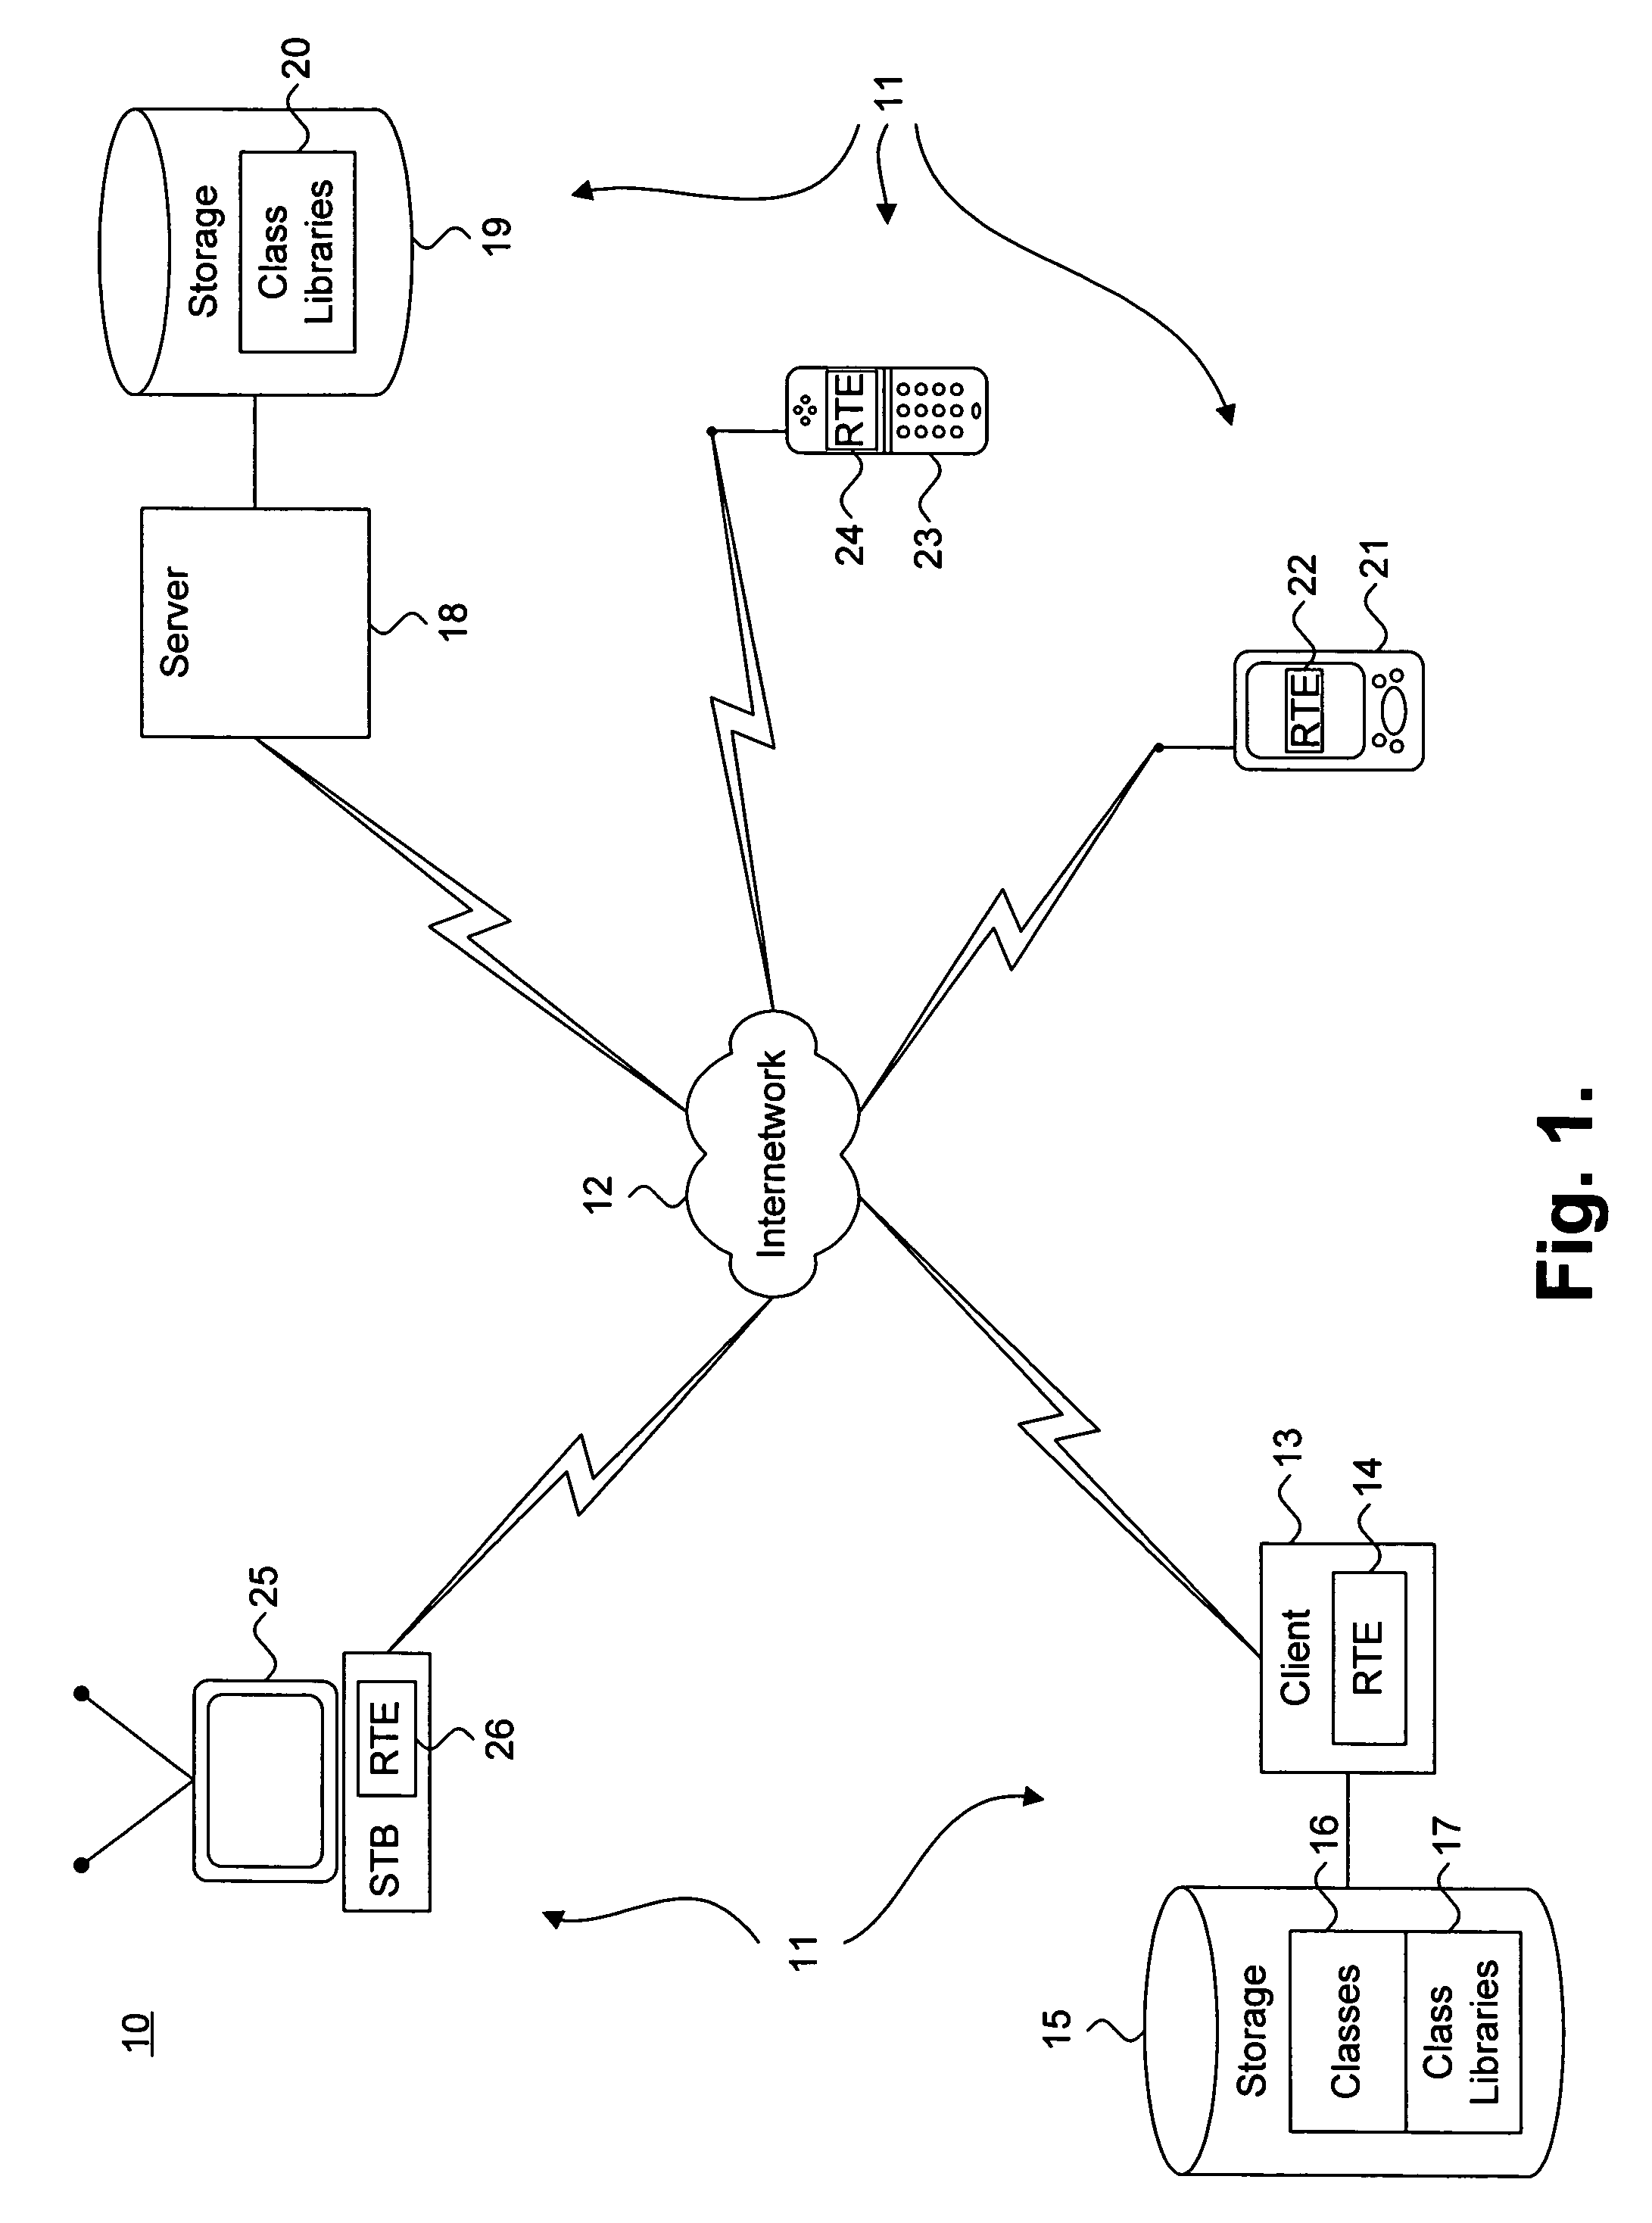 System and method for dynamic preloading of classes through memory space cloning of a master runtime system process